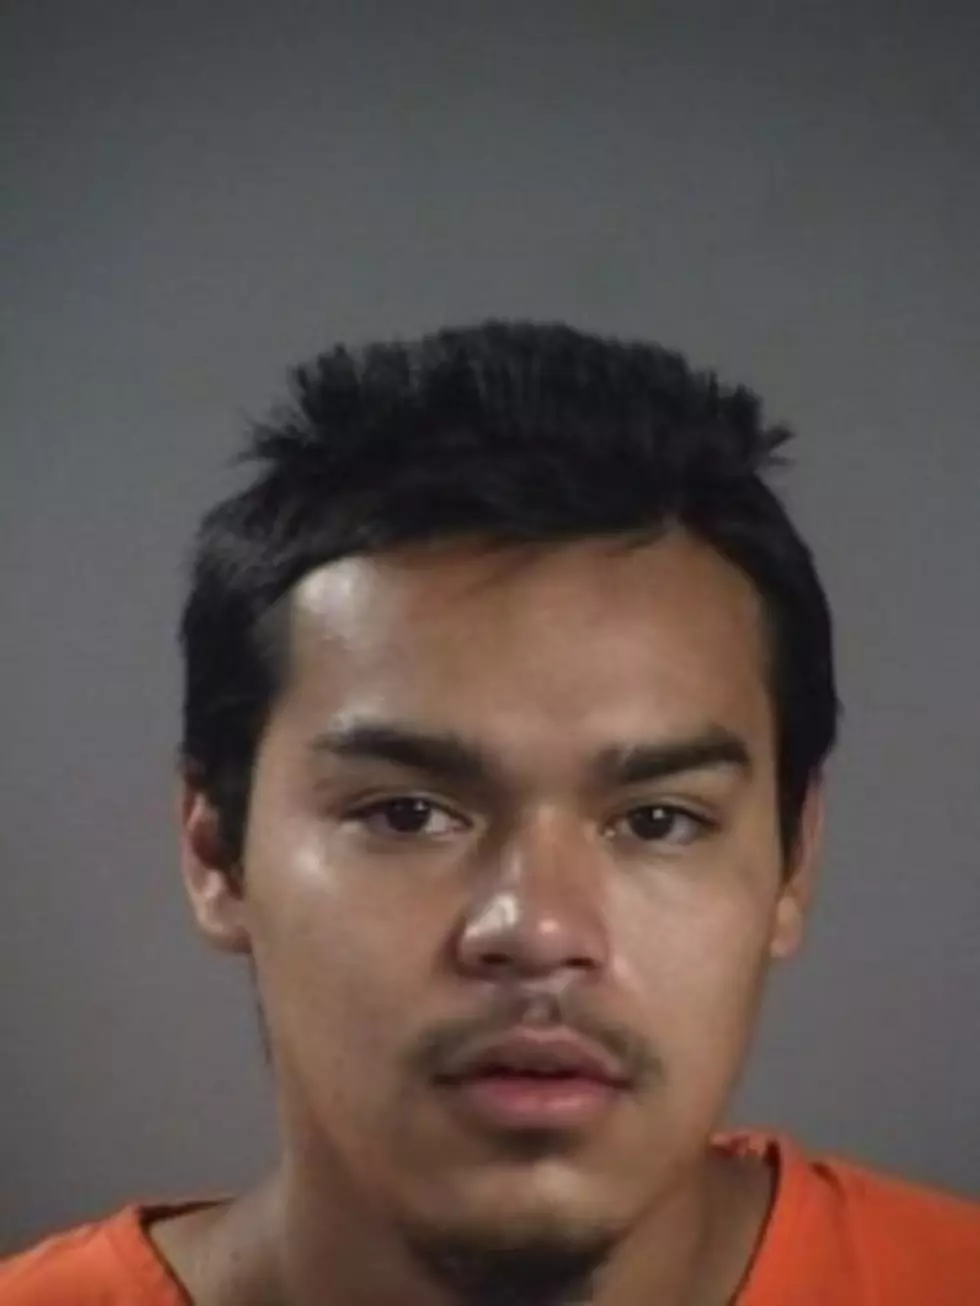 LOCAL: Nacho Cheese Leads To Arrest In Iowa City